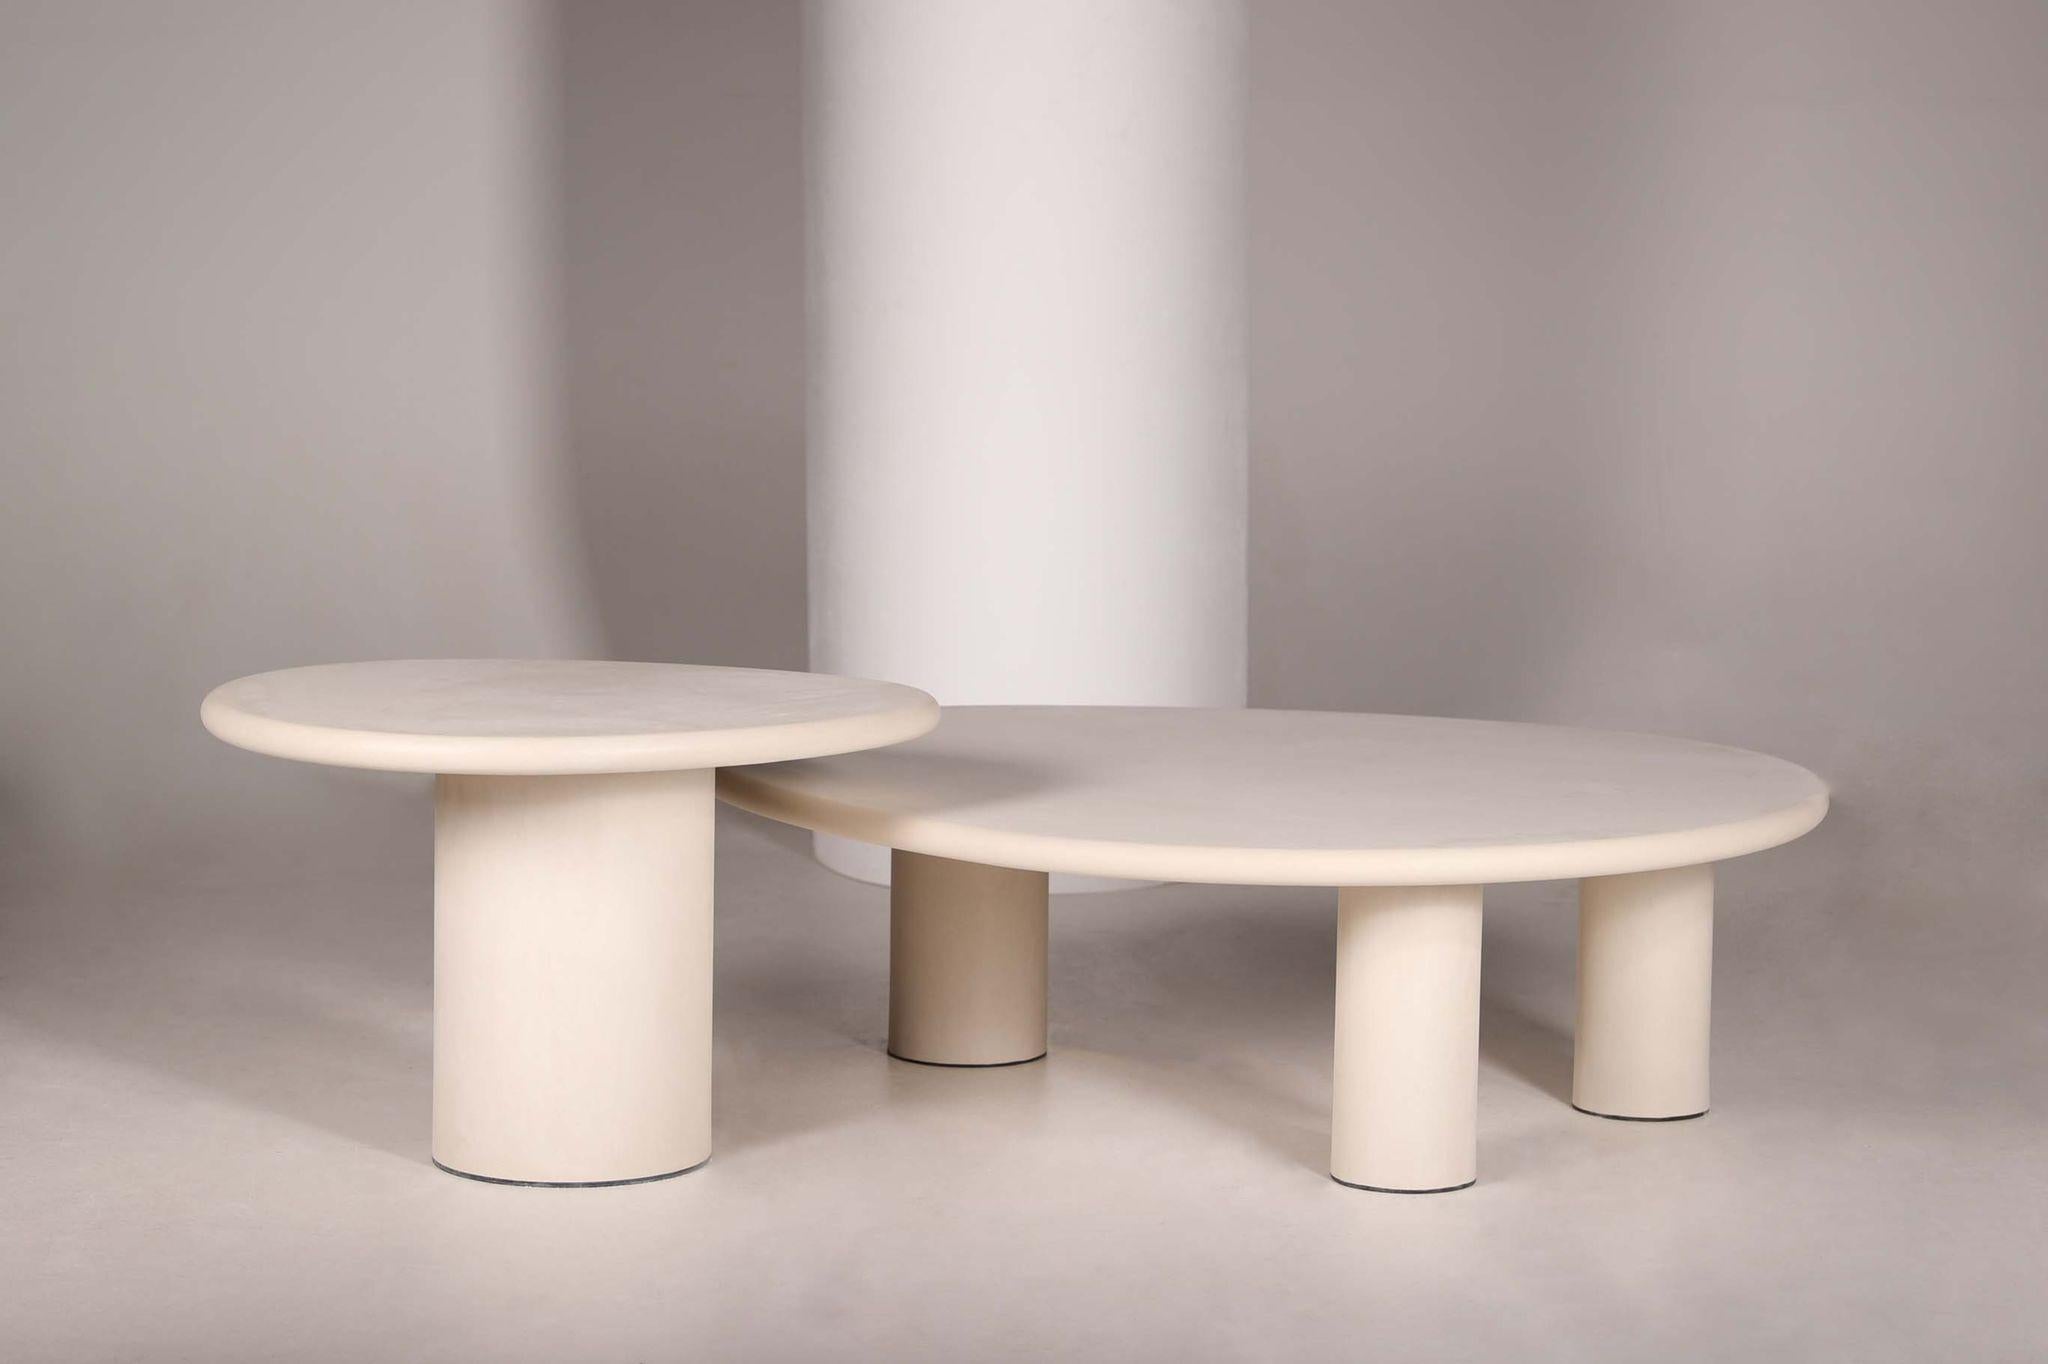 Handmade rock-shaped natural plaster table set by Philippe Colette
Dimensions: 
80 x 60 x 50, foot Ø 30 cm
130 x 100 x 38, foot Ø 20 cm 
Materials: mineral lime plaster.

Our tables are in mineral lime plaster, unlike mortex, they are very natural,